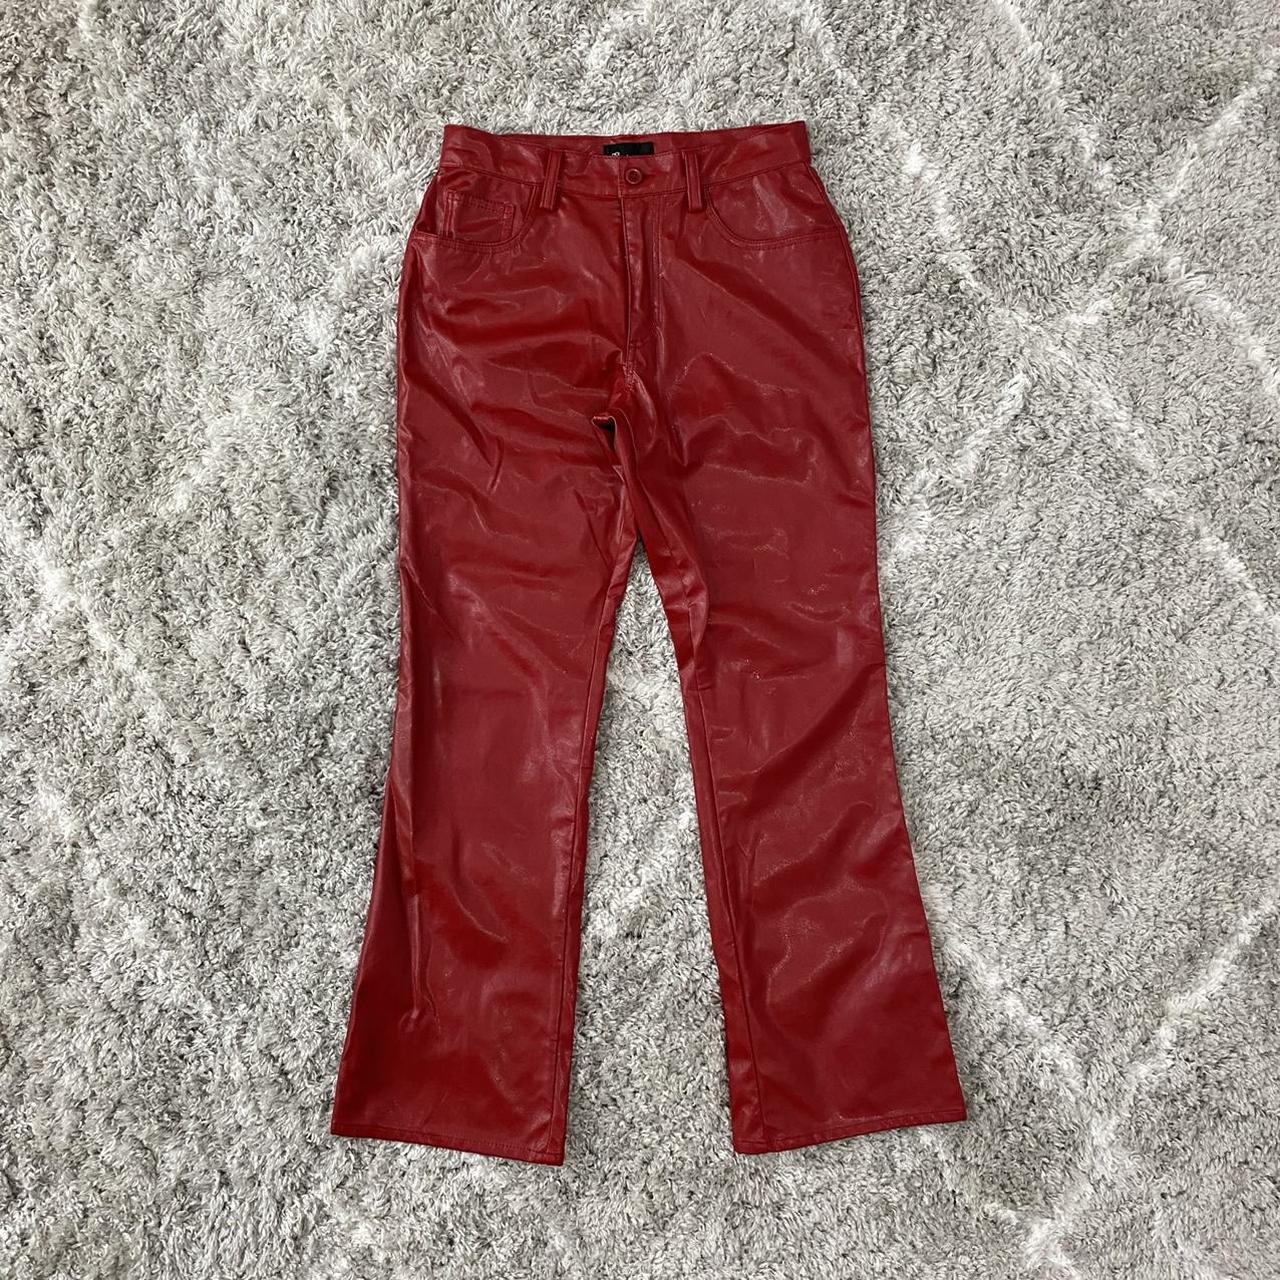 Vintage 90's y2k classic red faux leather pants by... - Depop